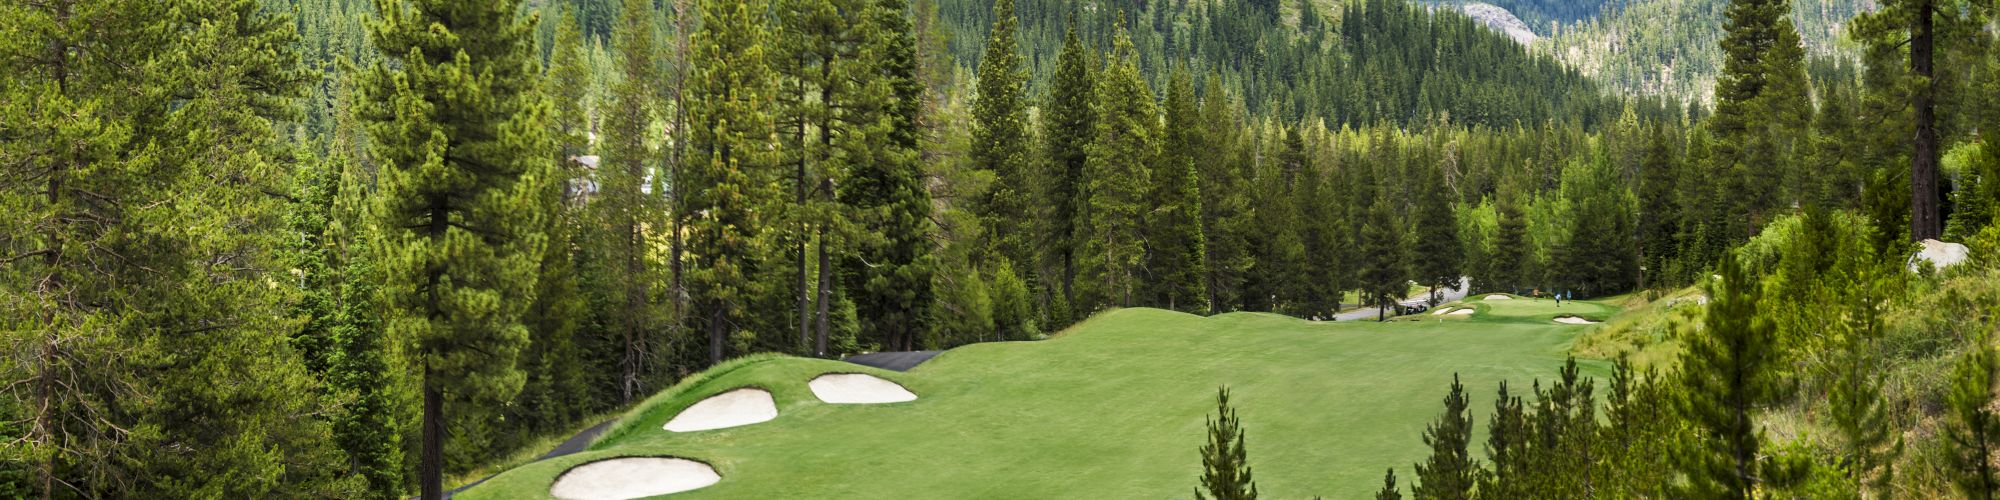 A scenic golf course with lush greens, sand bunkers, and a winding path, surrounded by tall pine trees and forested mountains under a blue sky.